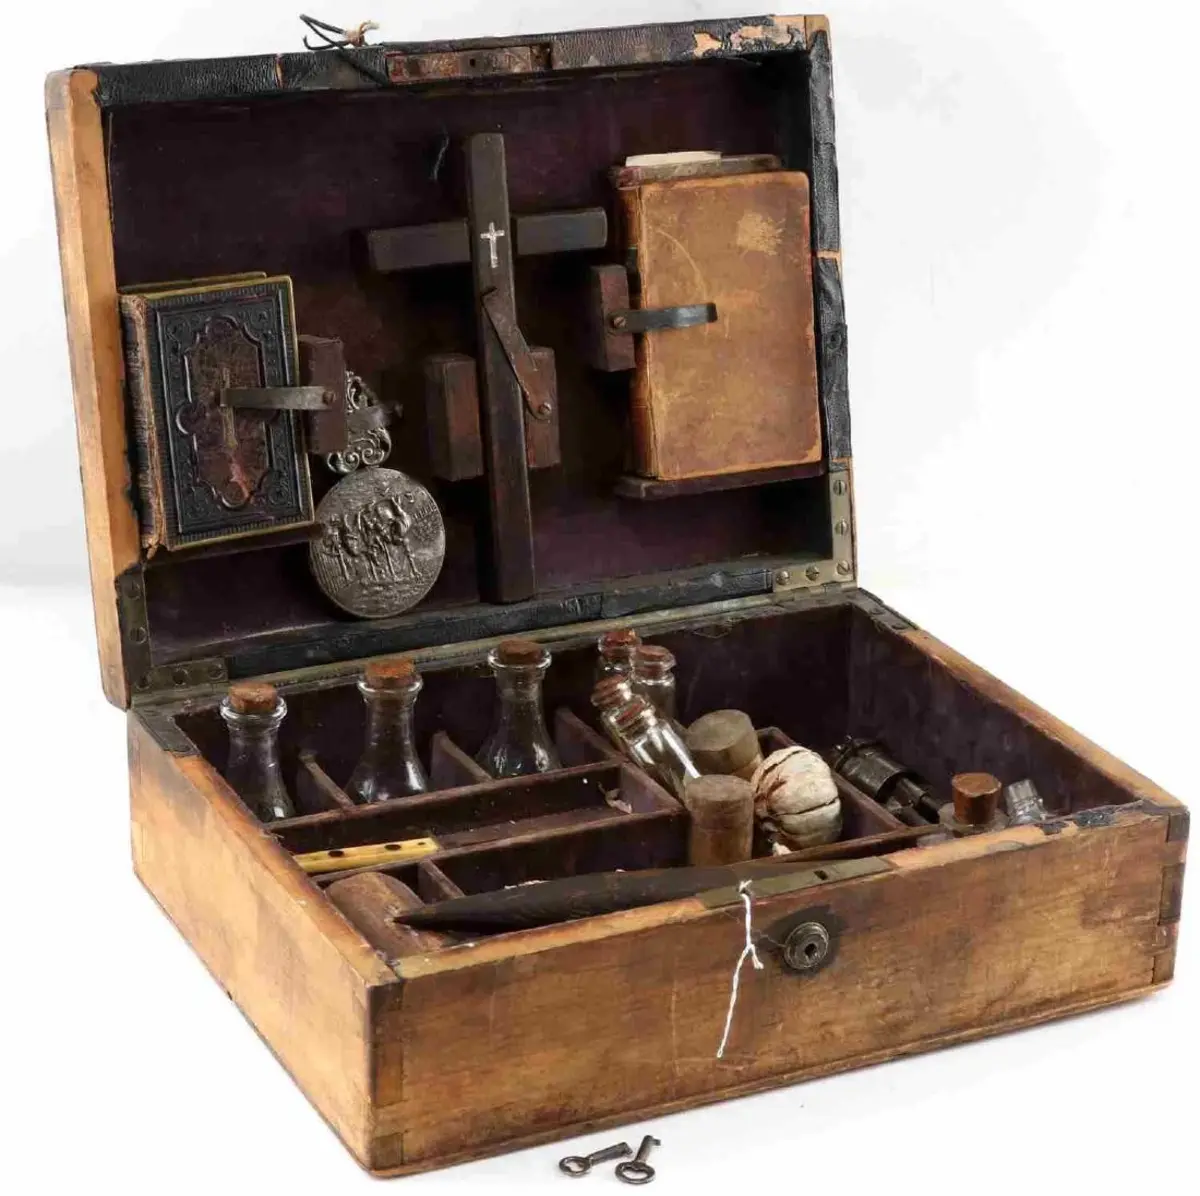 Applied Auctions sold this kit in 2019 for $2,600. The lid holds a book of psalms and proverbs in German a small hand-held mirror, cross inscribed with another cross in the middle, glass bottles, small knife, four glass vials, two small wooden jars, two candles and garlic, a mallet, and stakes. Bottles hold nails, garlic, holy water, matches and other unidentified items.